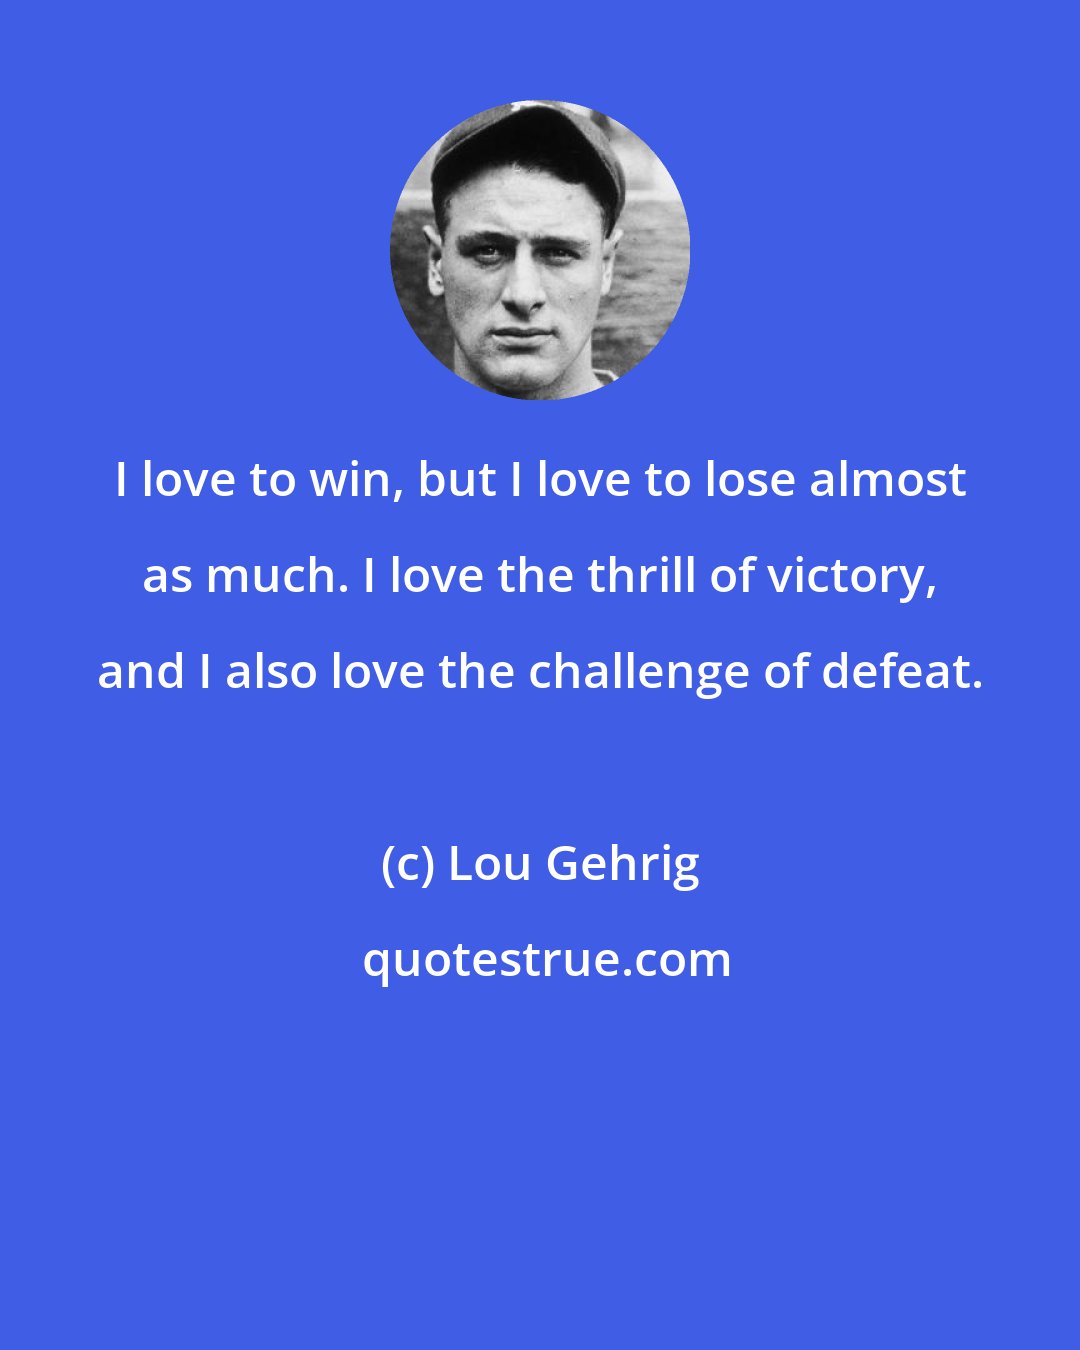 Lou Gehrig: I love to win, but I love to lose almost as much. I love the thrill of victory, and I also love the challenge of defeat.